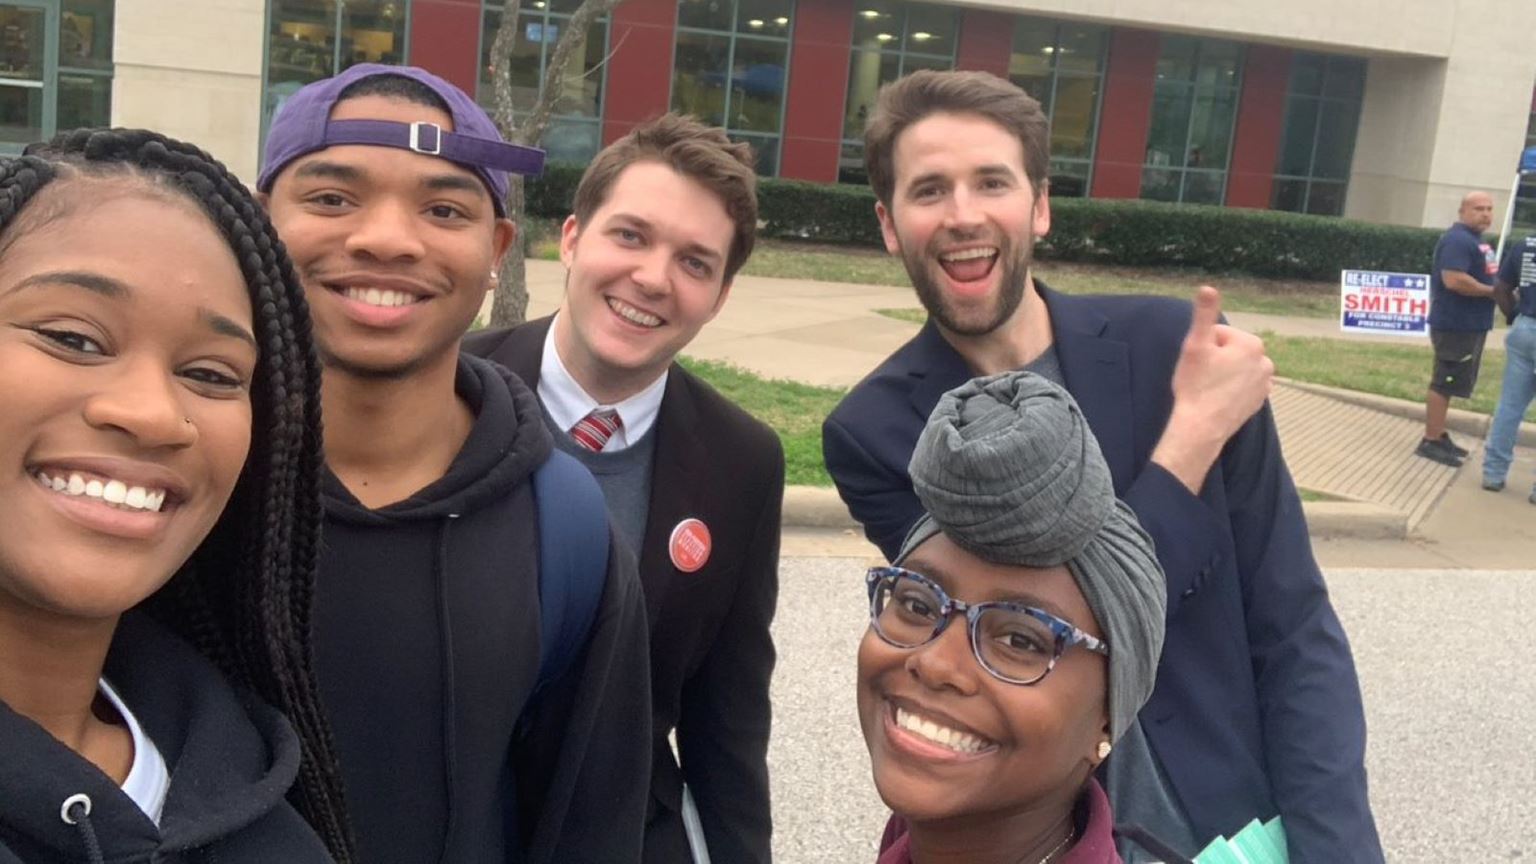 Young volunteers outside of a polling location